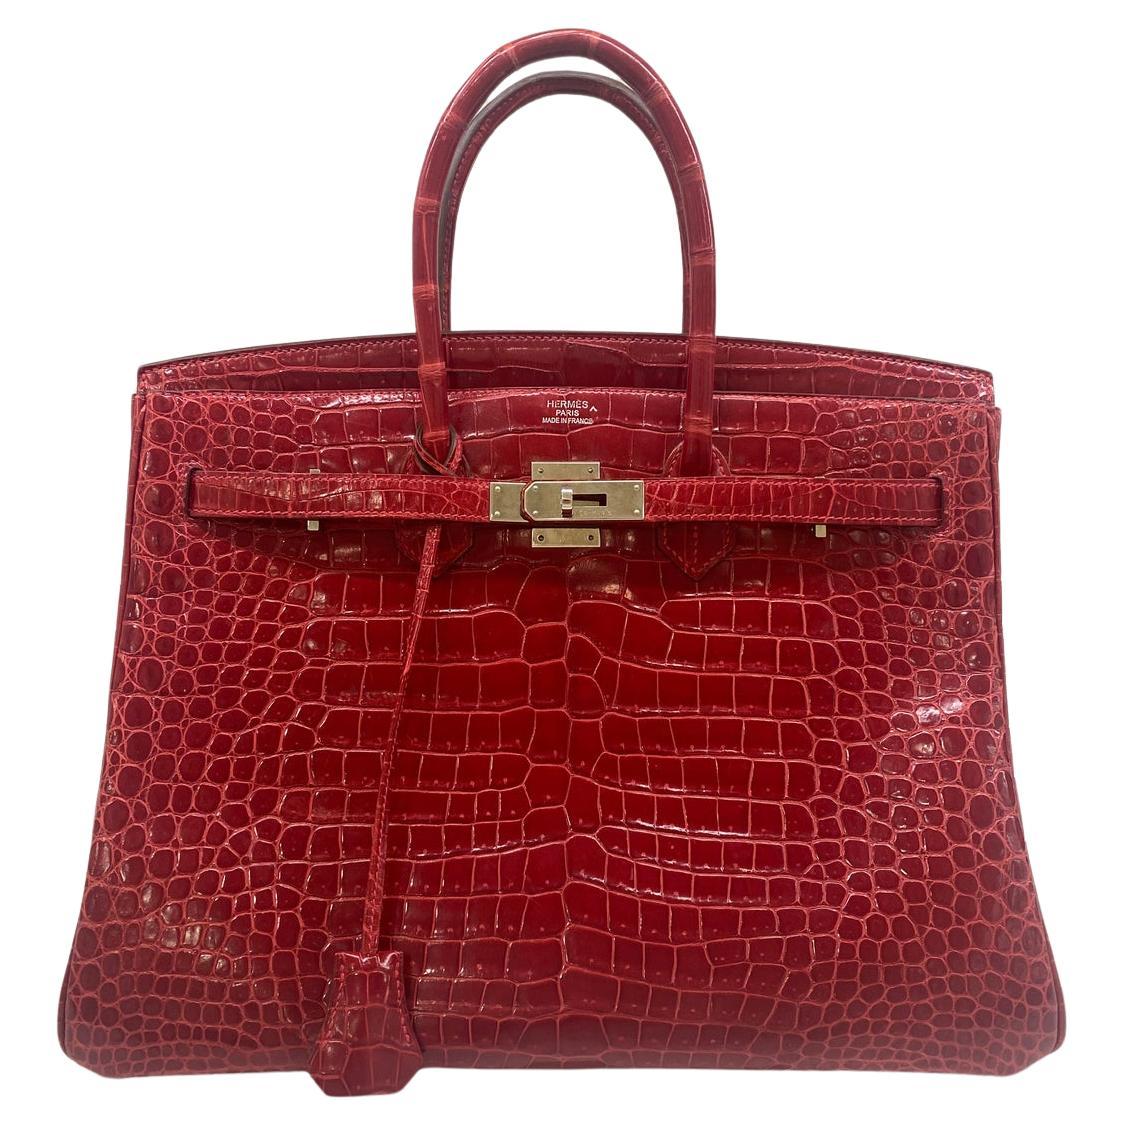 How long is the wait for a Hermes alligator bag?